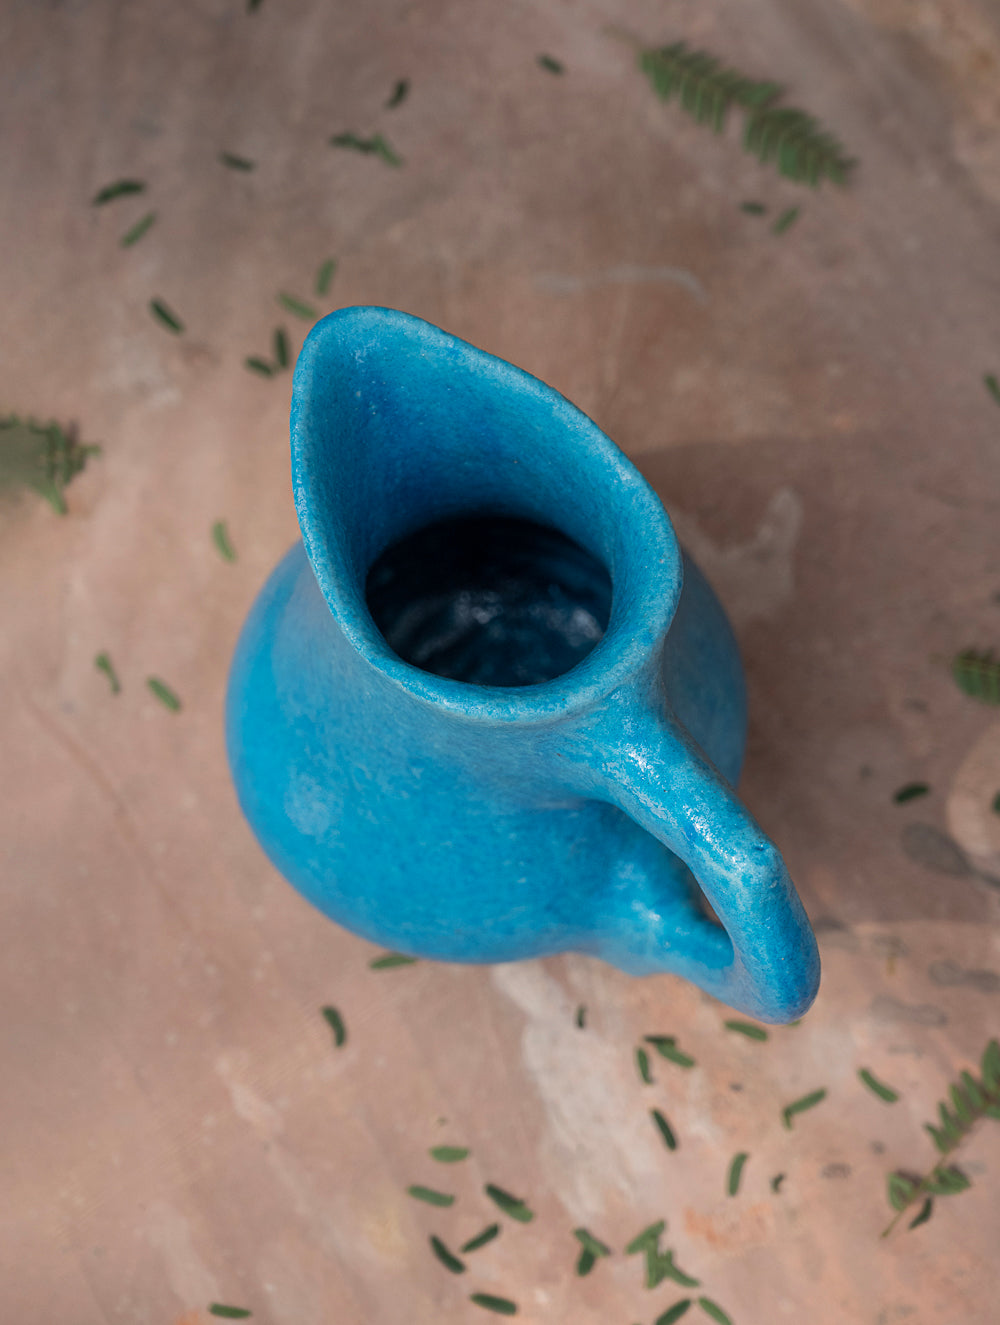 Load image into Gallery viewer, Delhi Blue Art Pottery Curio / Vase With Handle